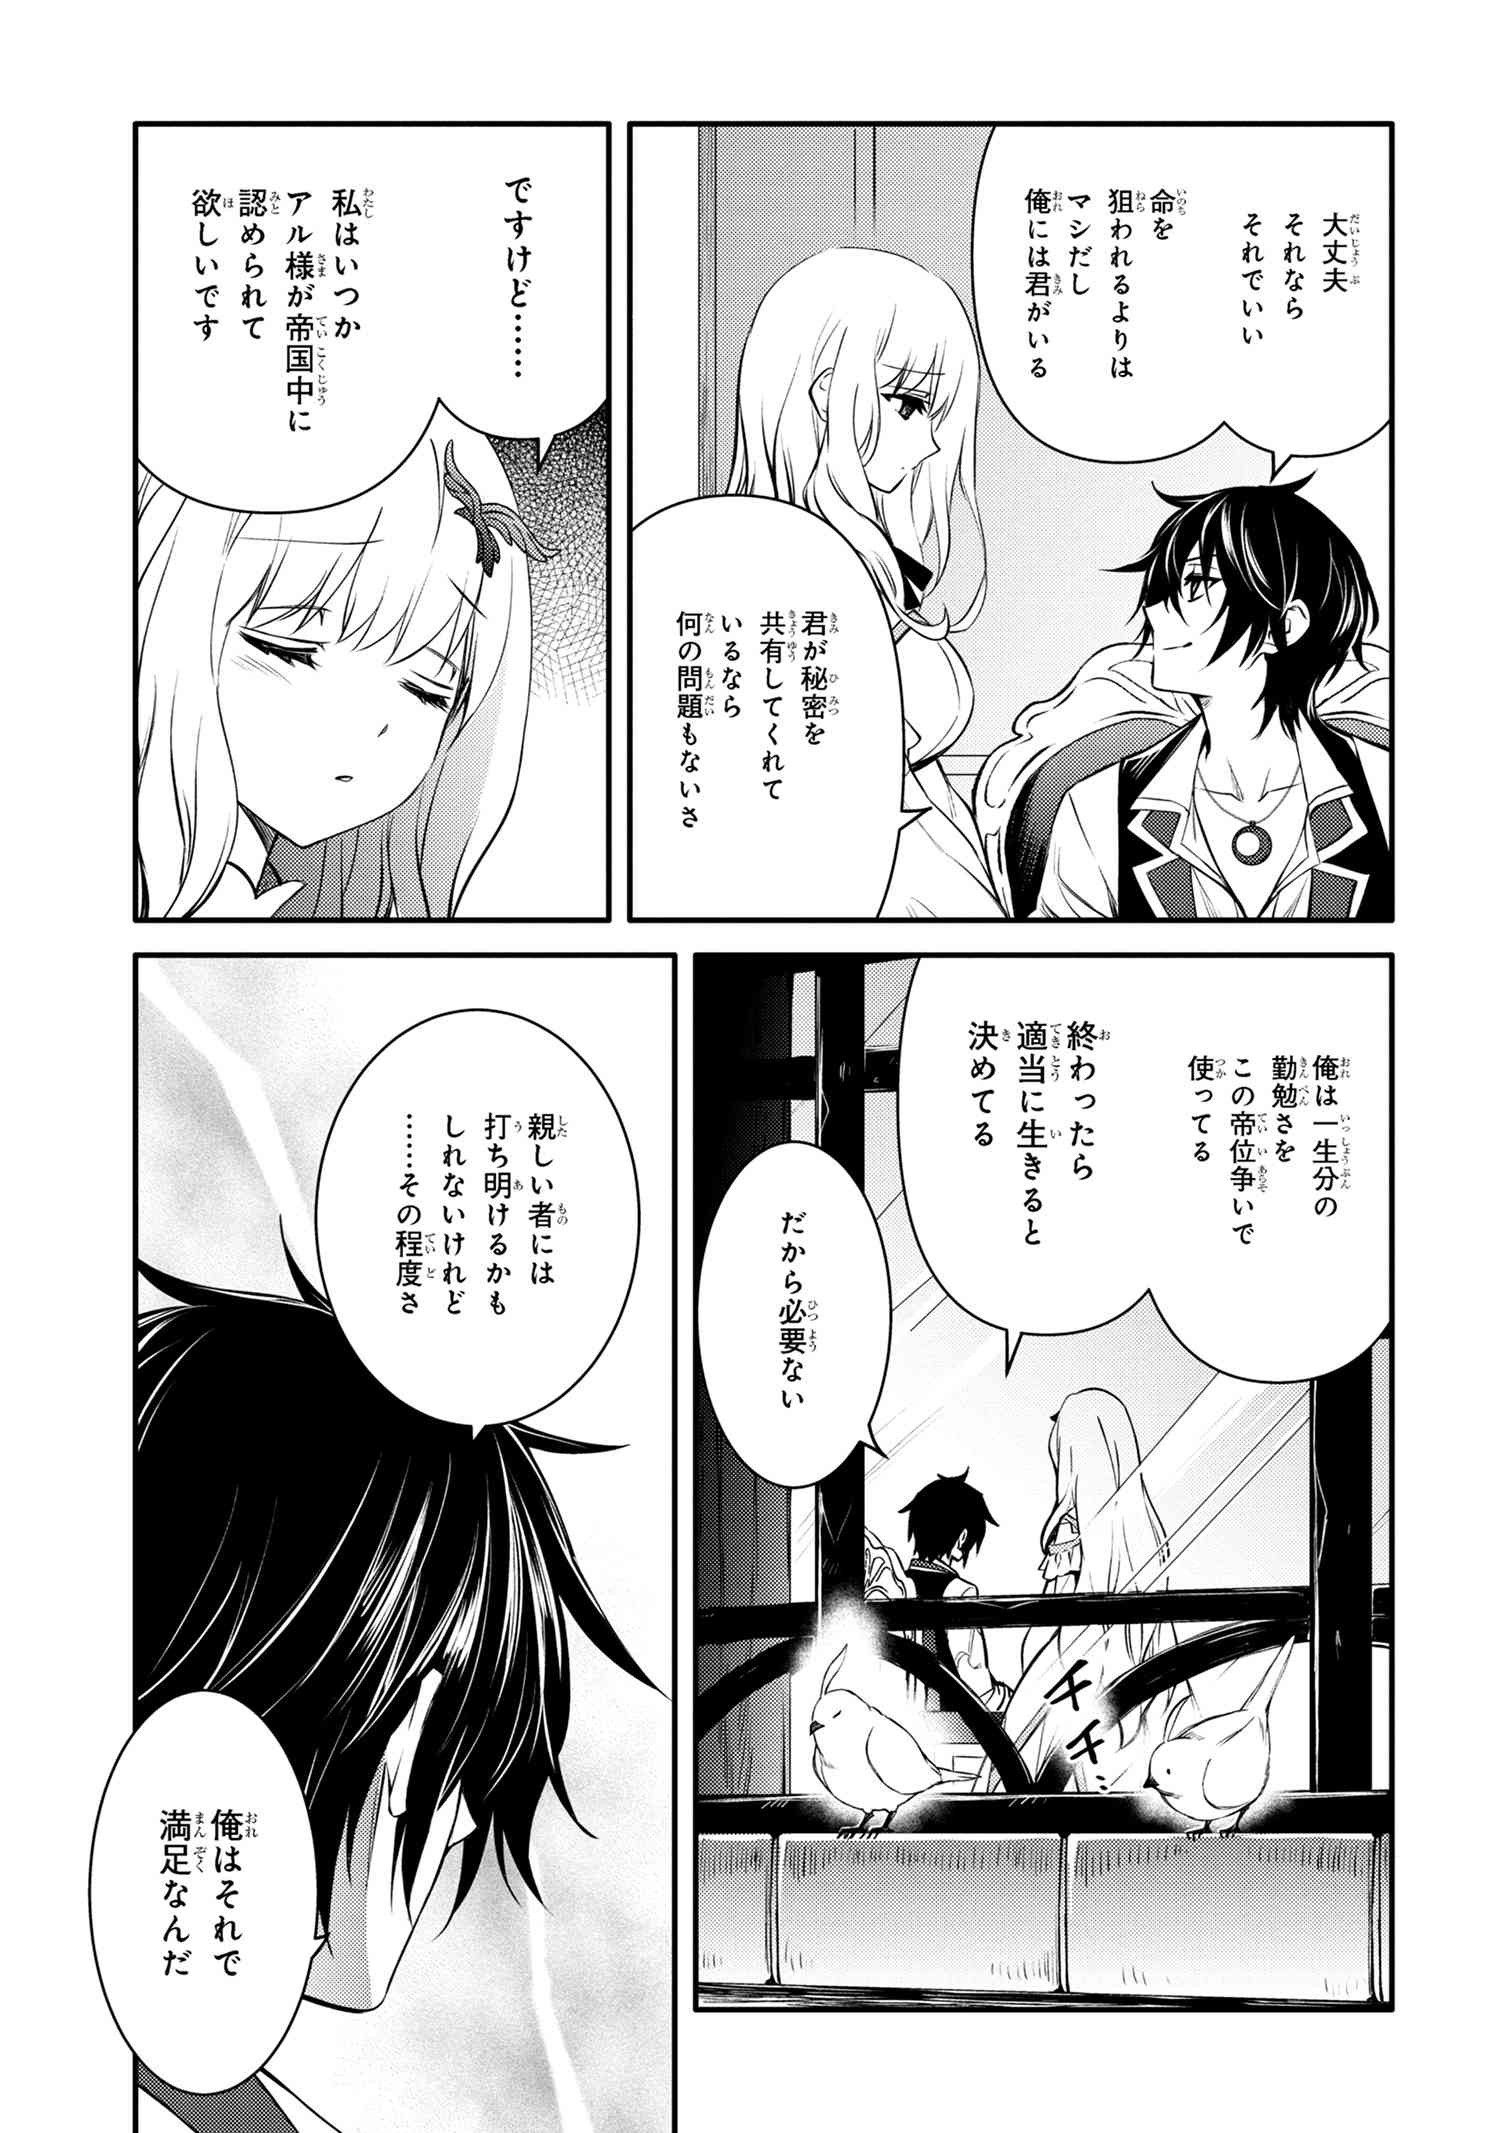 The Strongest Dull Prince’s Secret Battle for the Throne - Chapter 38.1 - Page 7